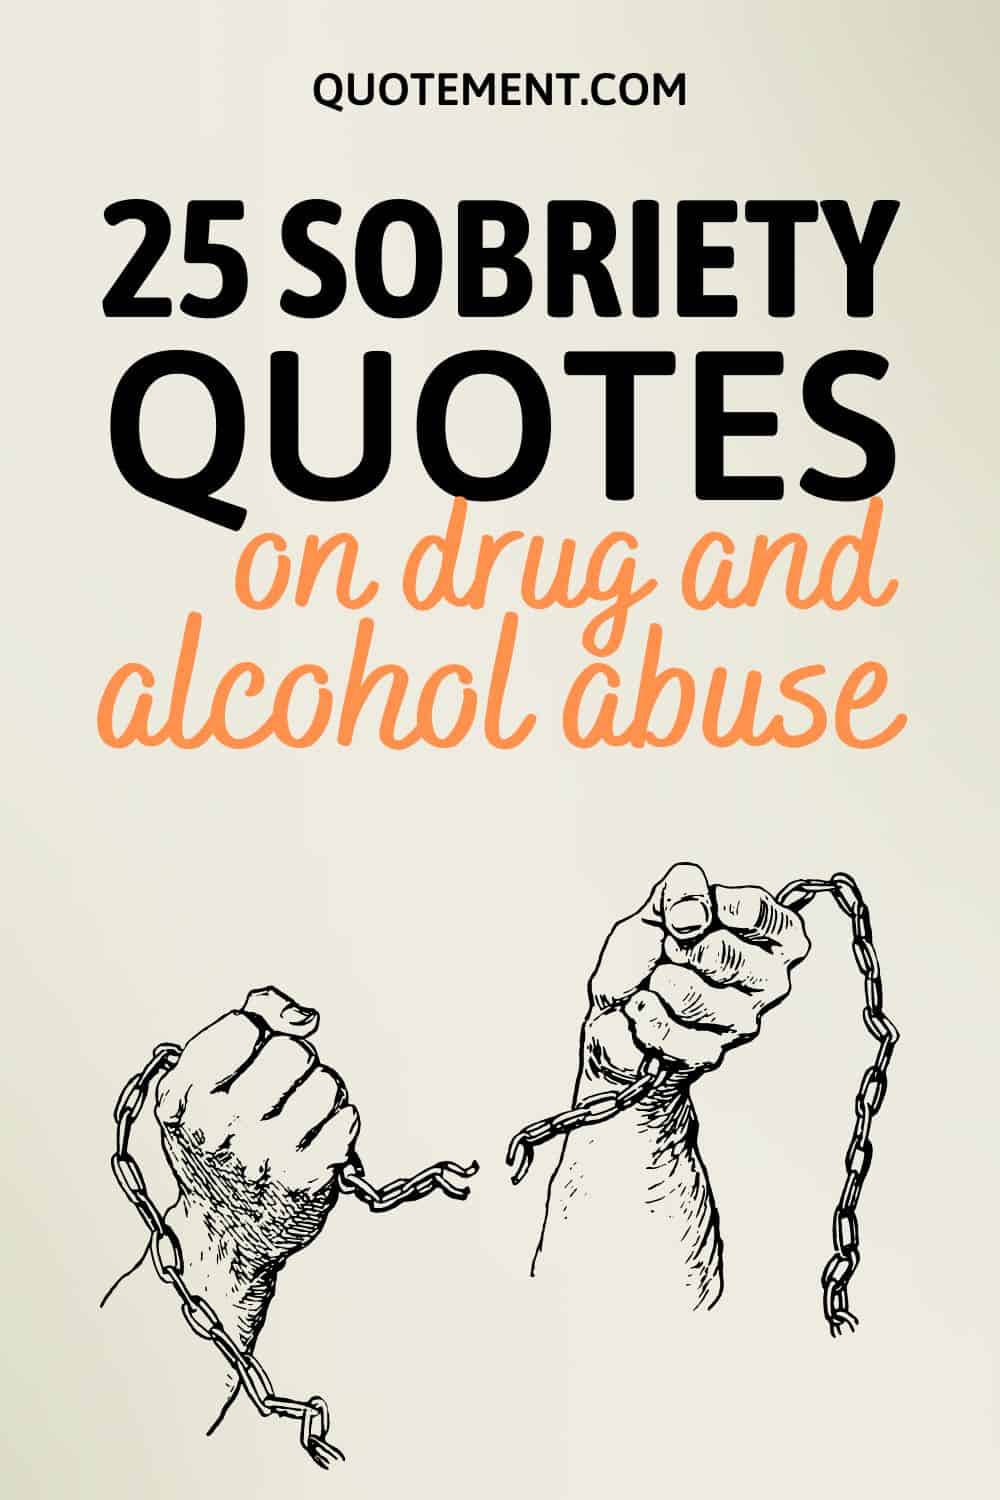 25 Best Sobriety Quotes To Help You Stop Substance Abuse
